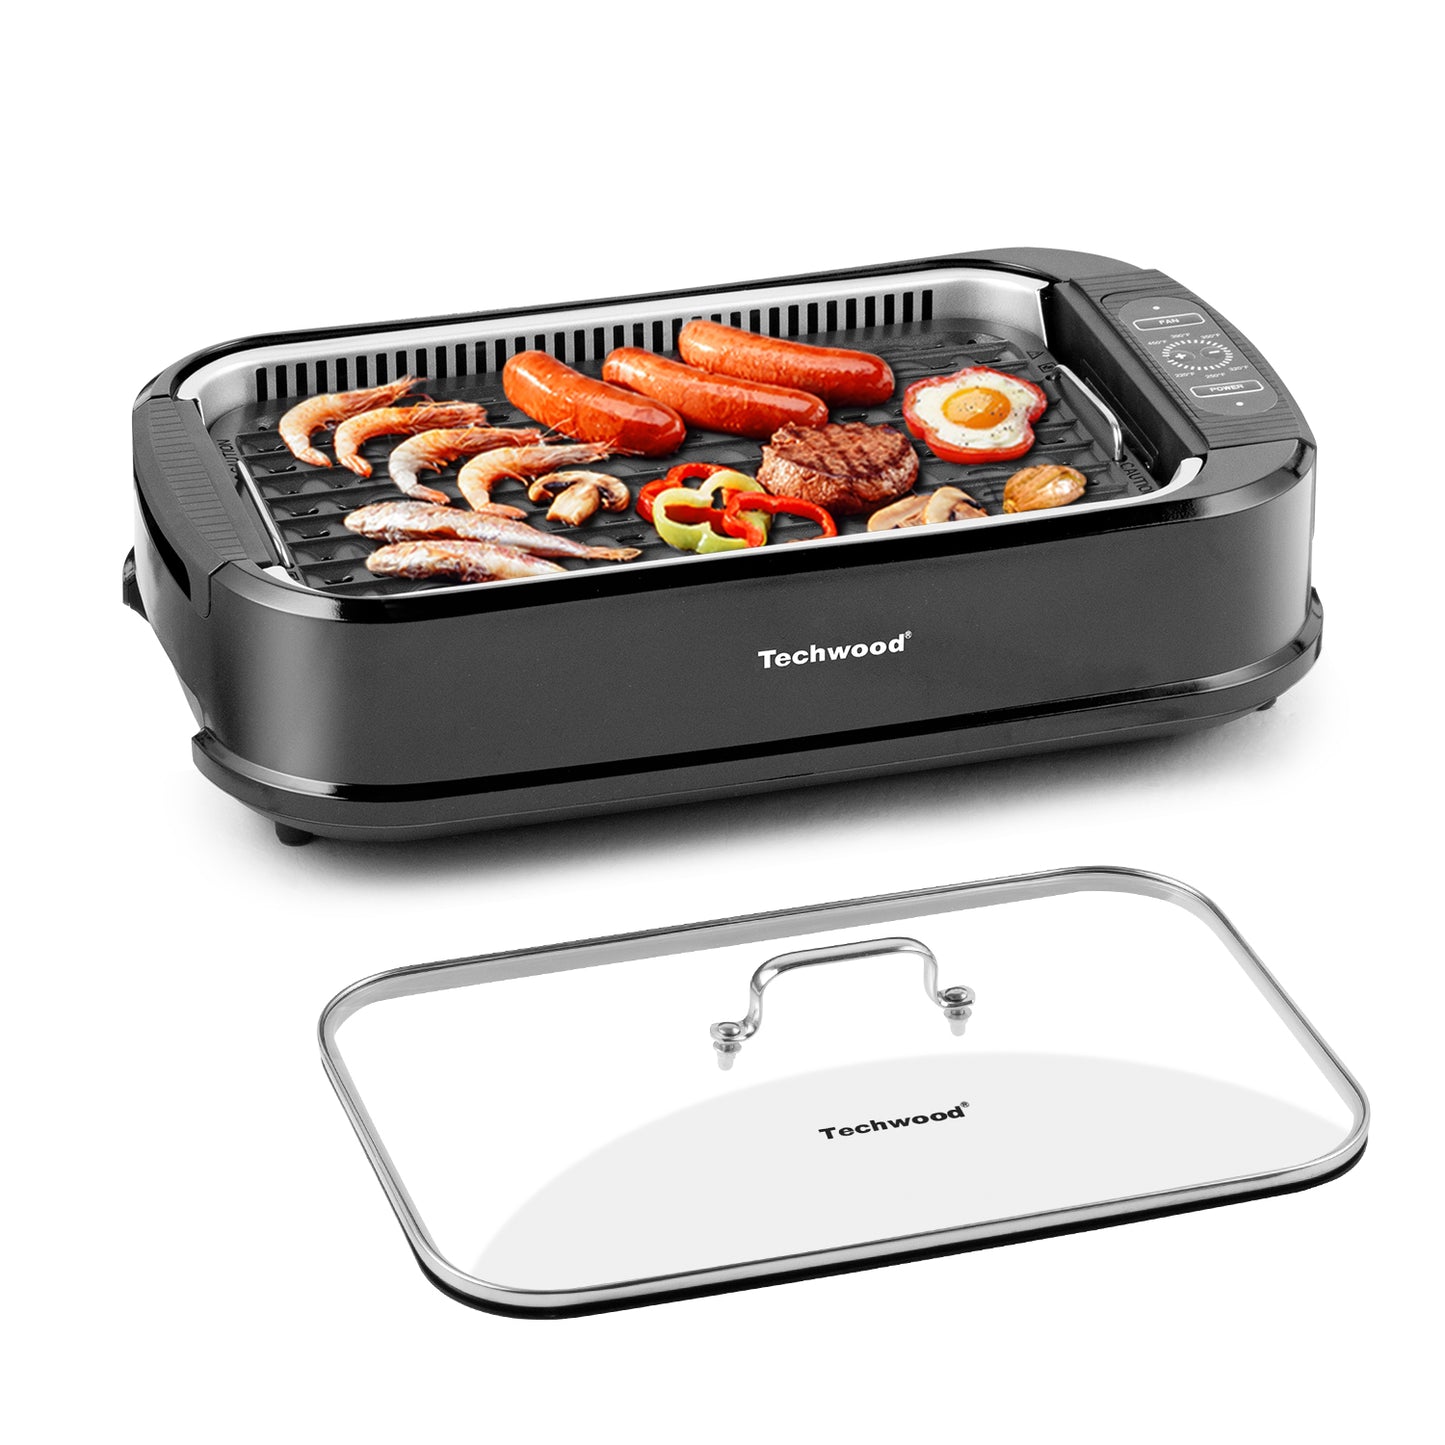 Techwood Smokeless Grill Indoor Grill Power Electric Grill, Compact& Portable Non-Stick BBQ Grill, Turbo Smoke Extractor